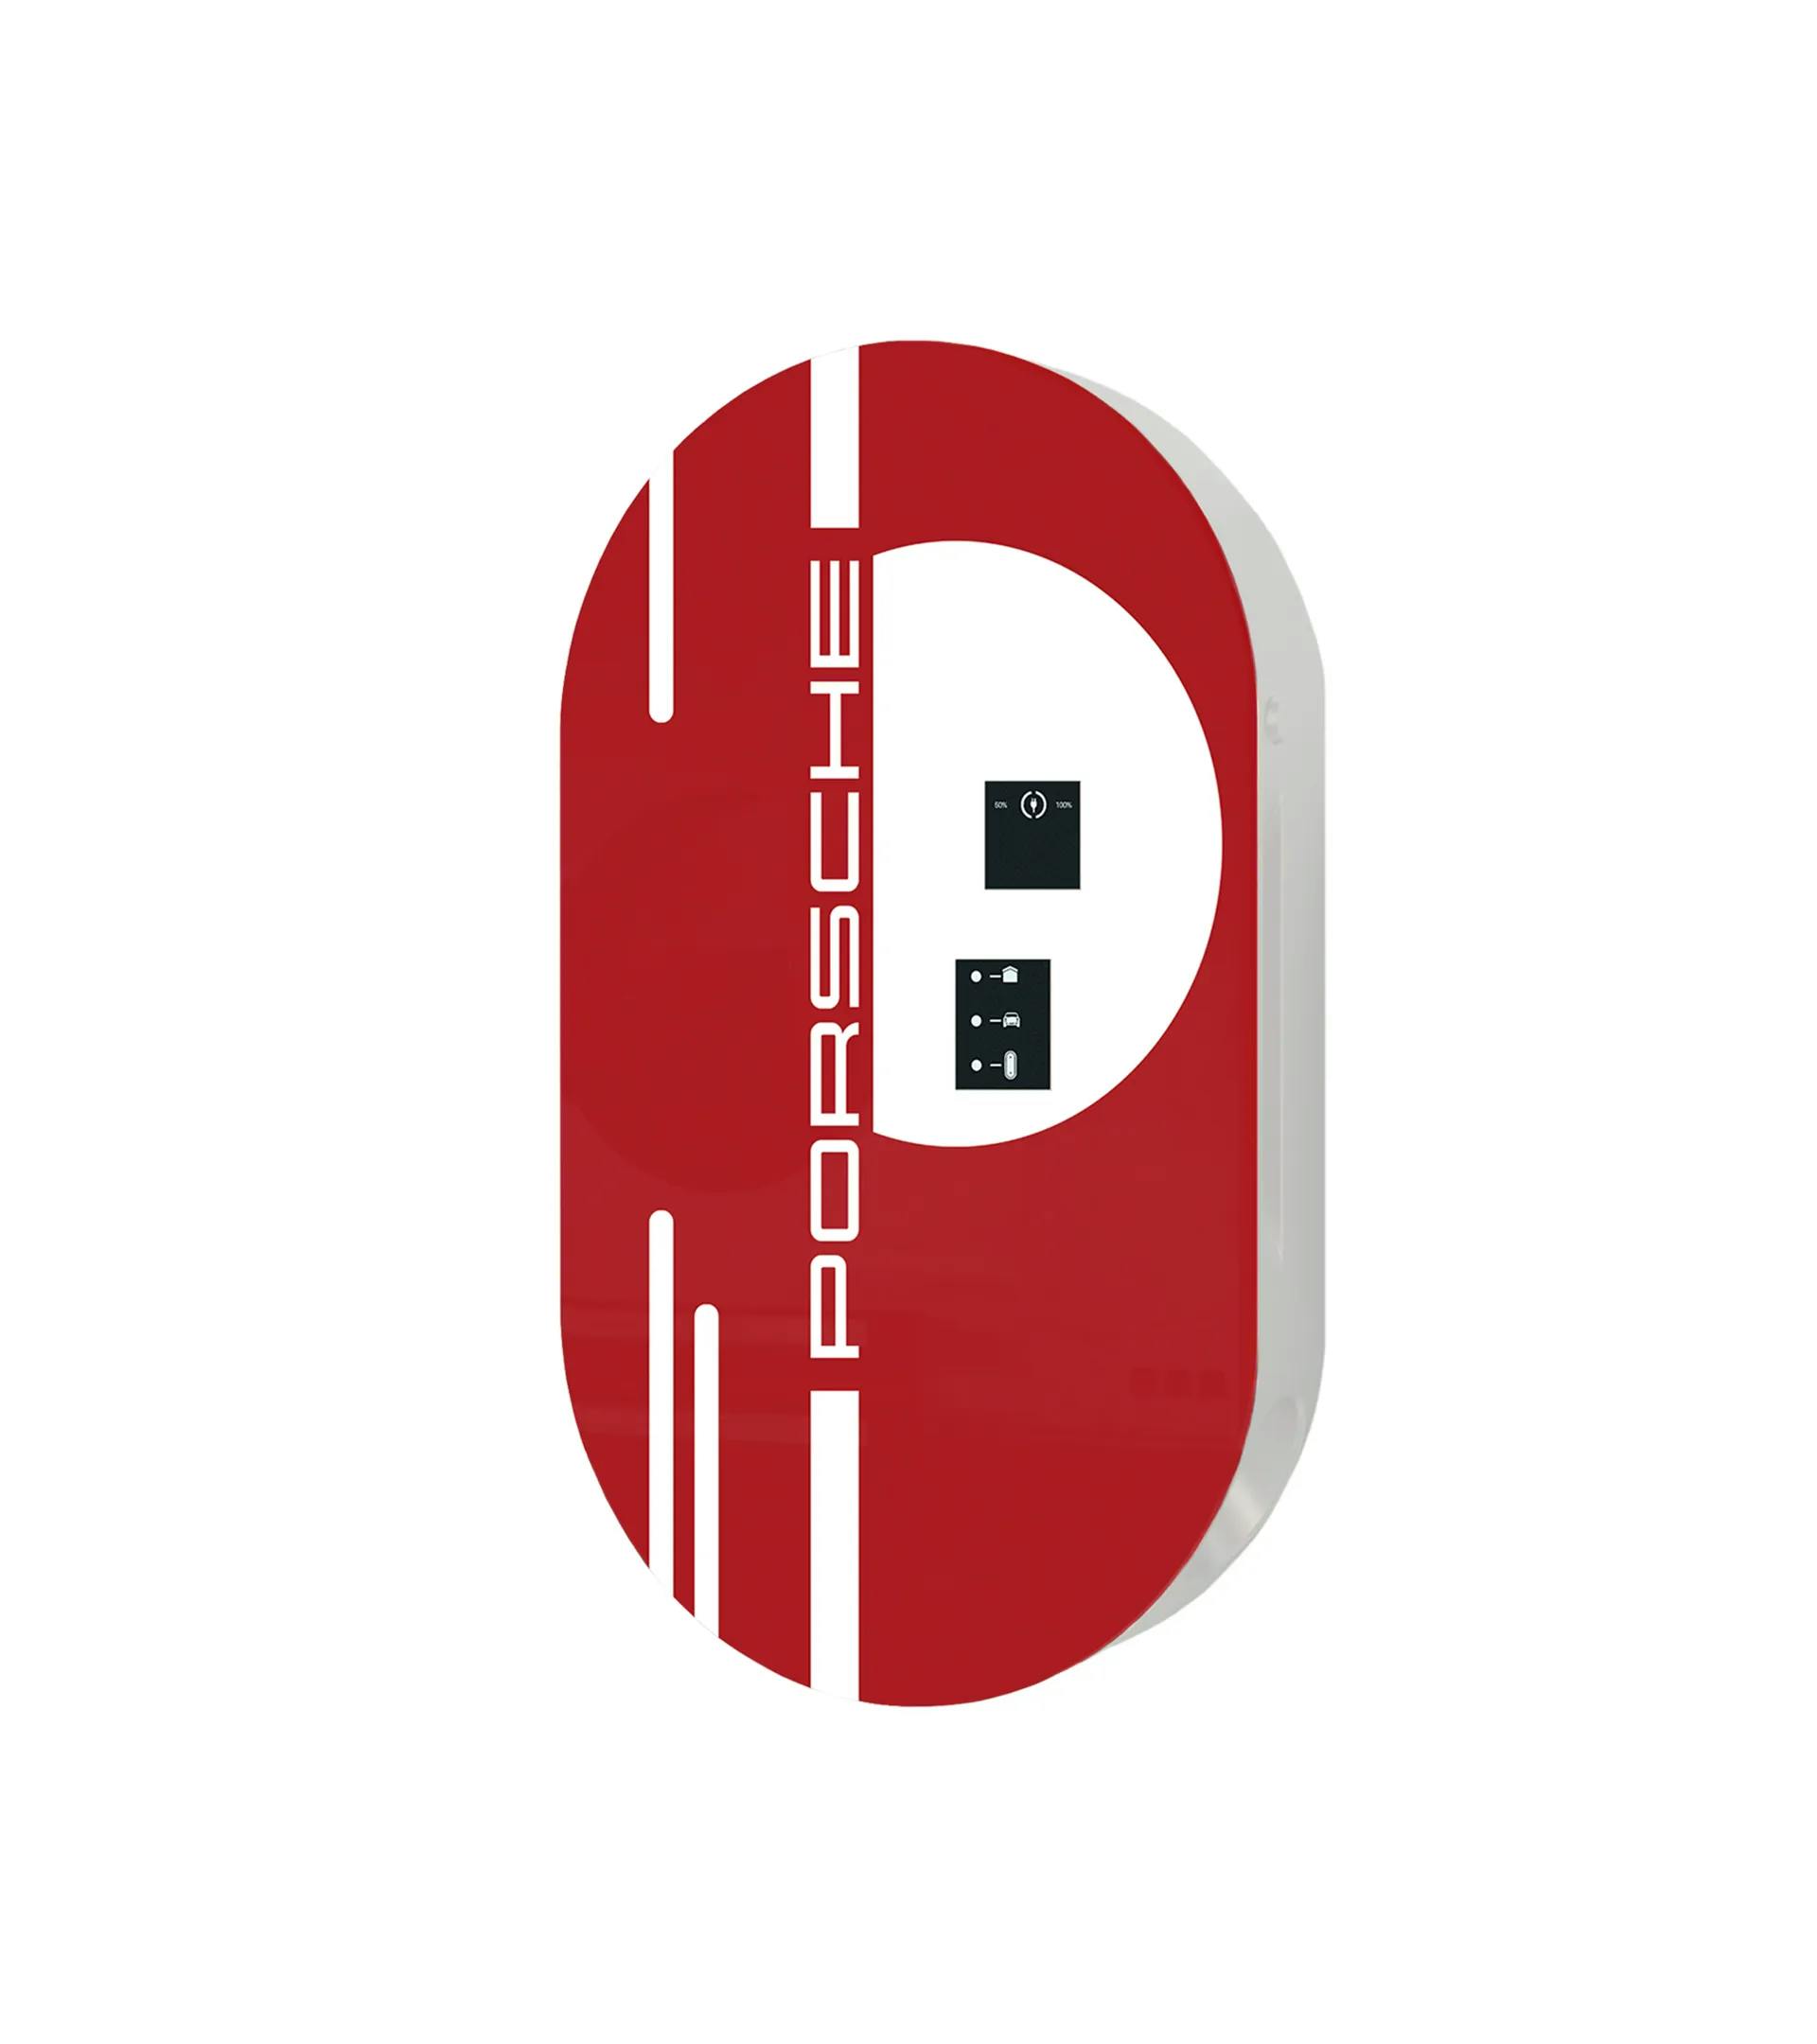 Design cover for closed Charging Dock